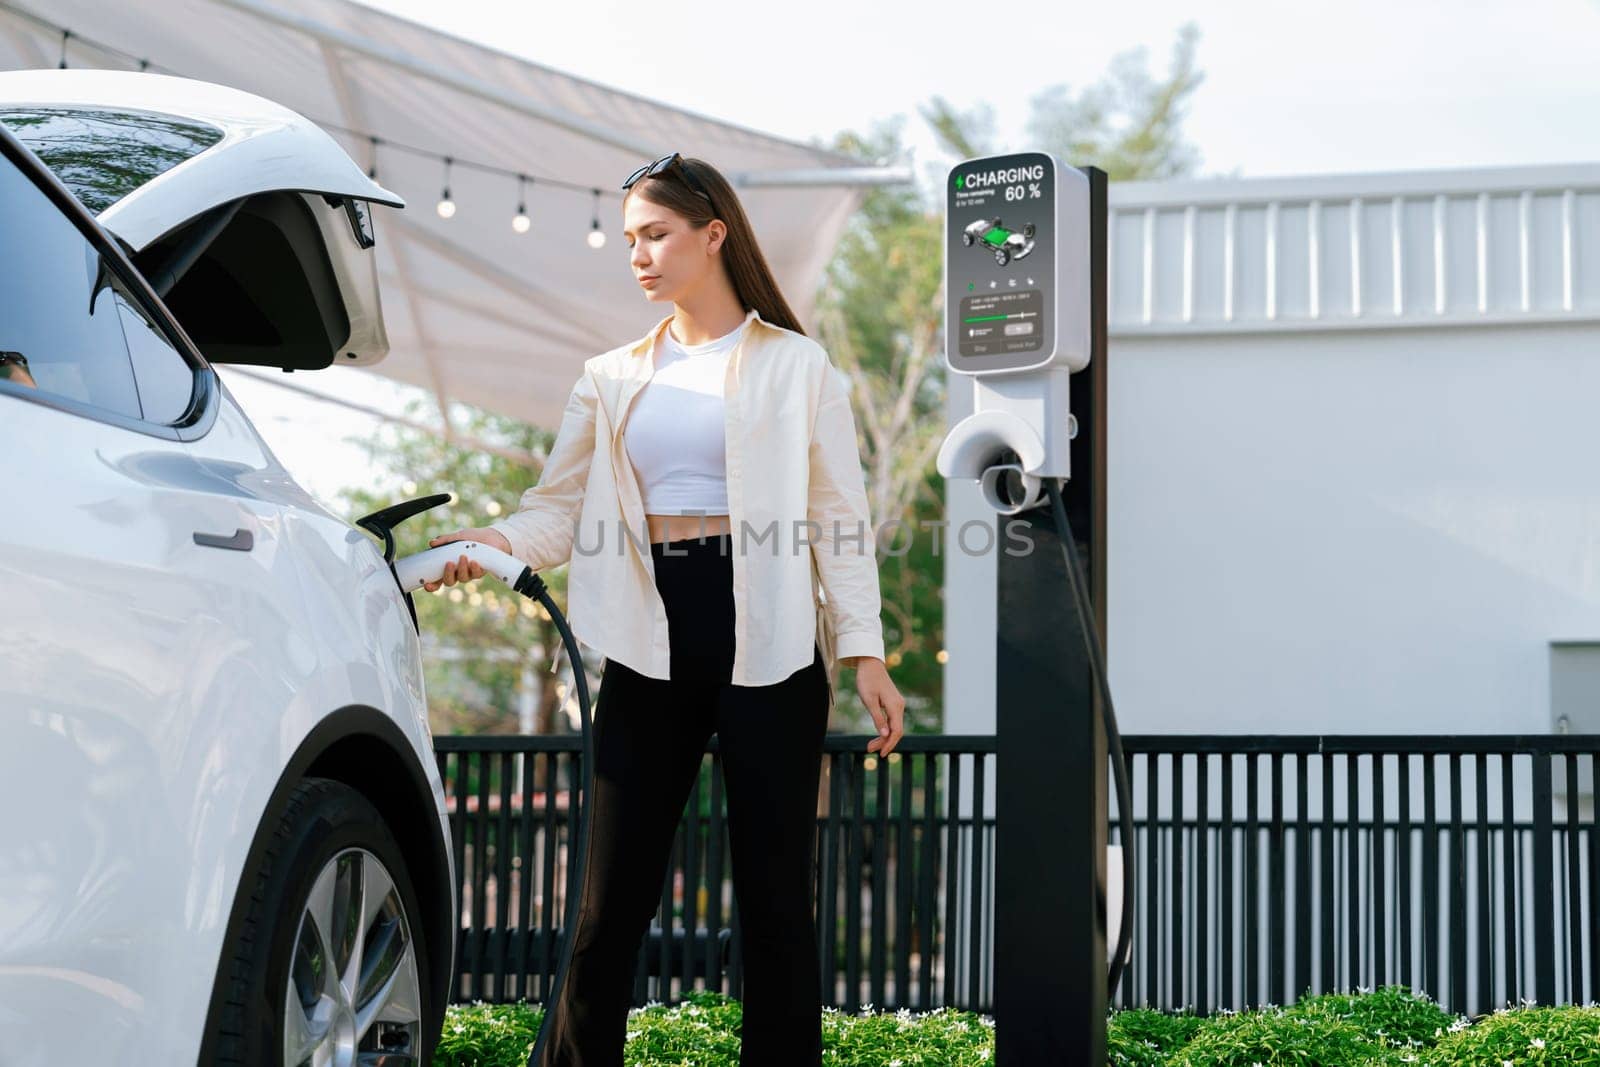 Young woman put EV charger to recharge electric car battery. Expedient by biancoblue